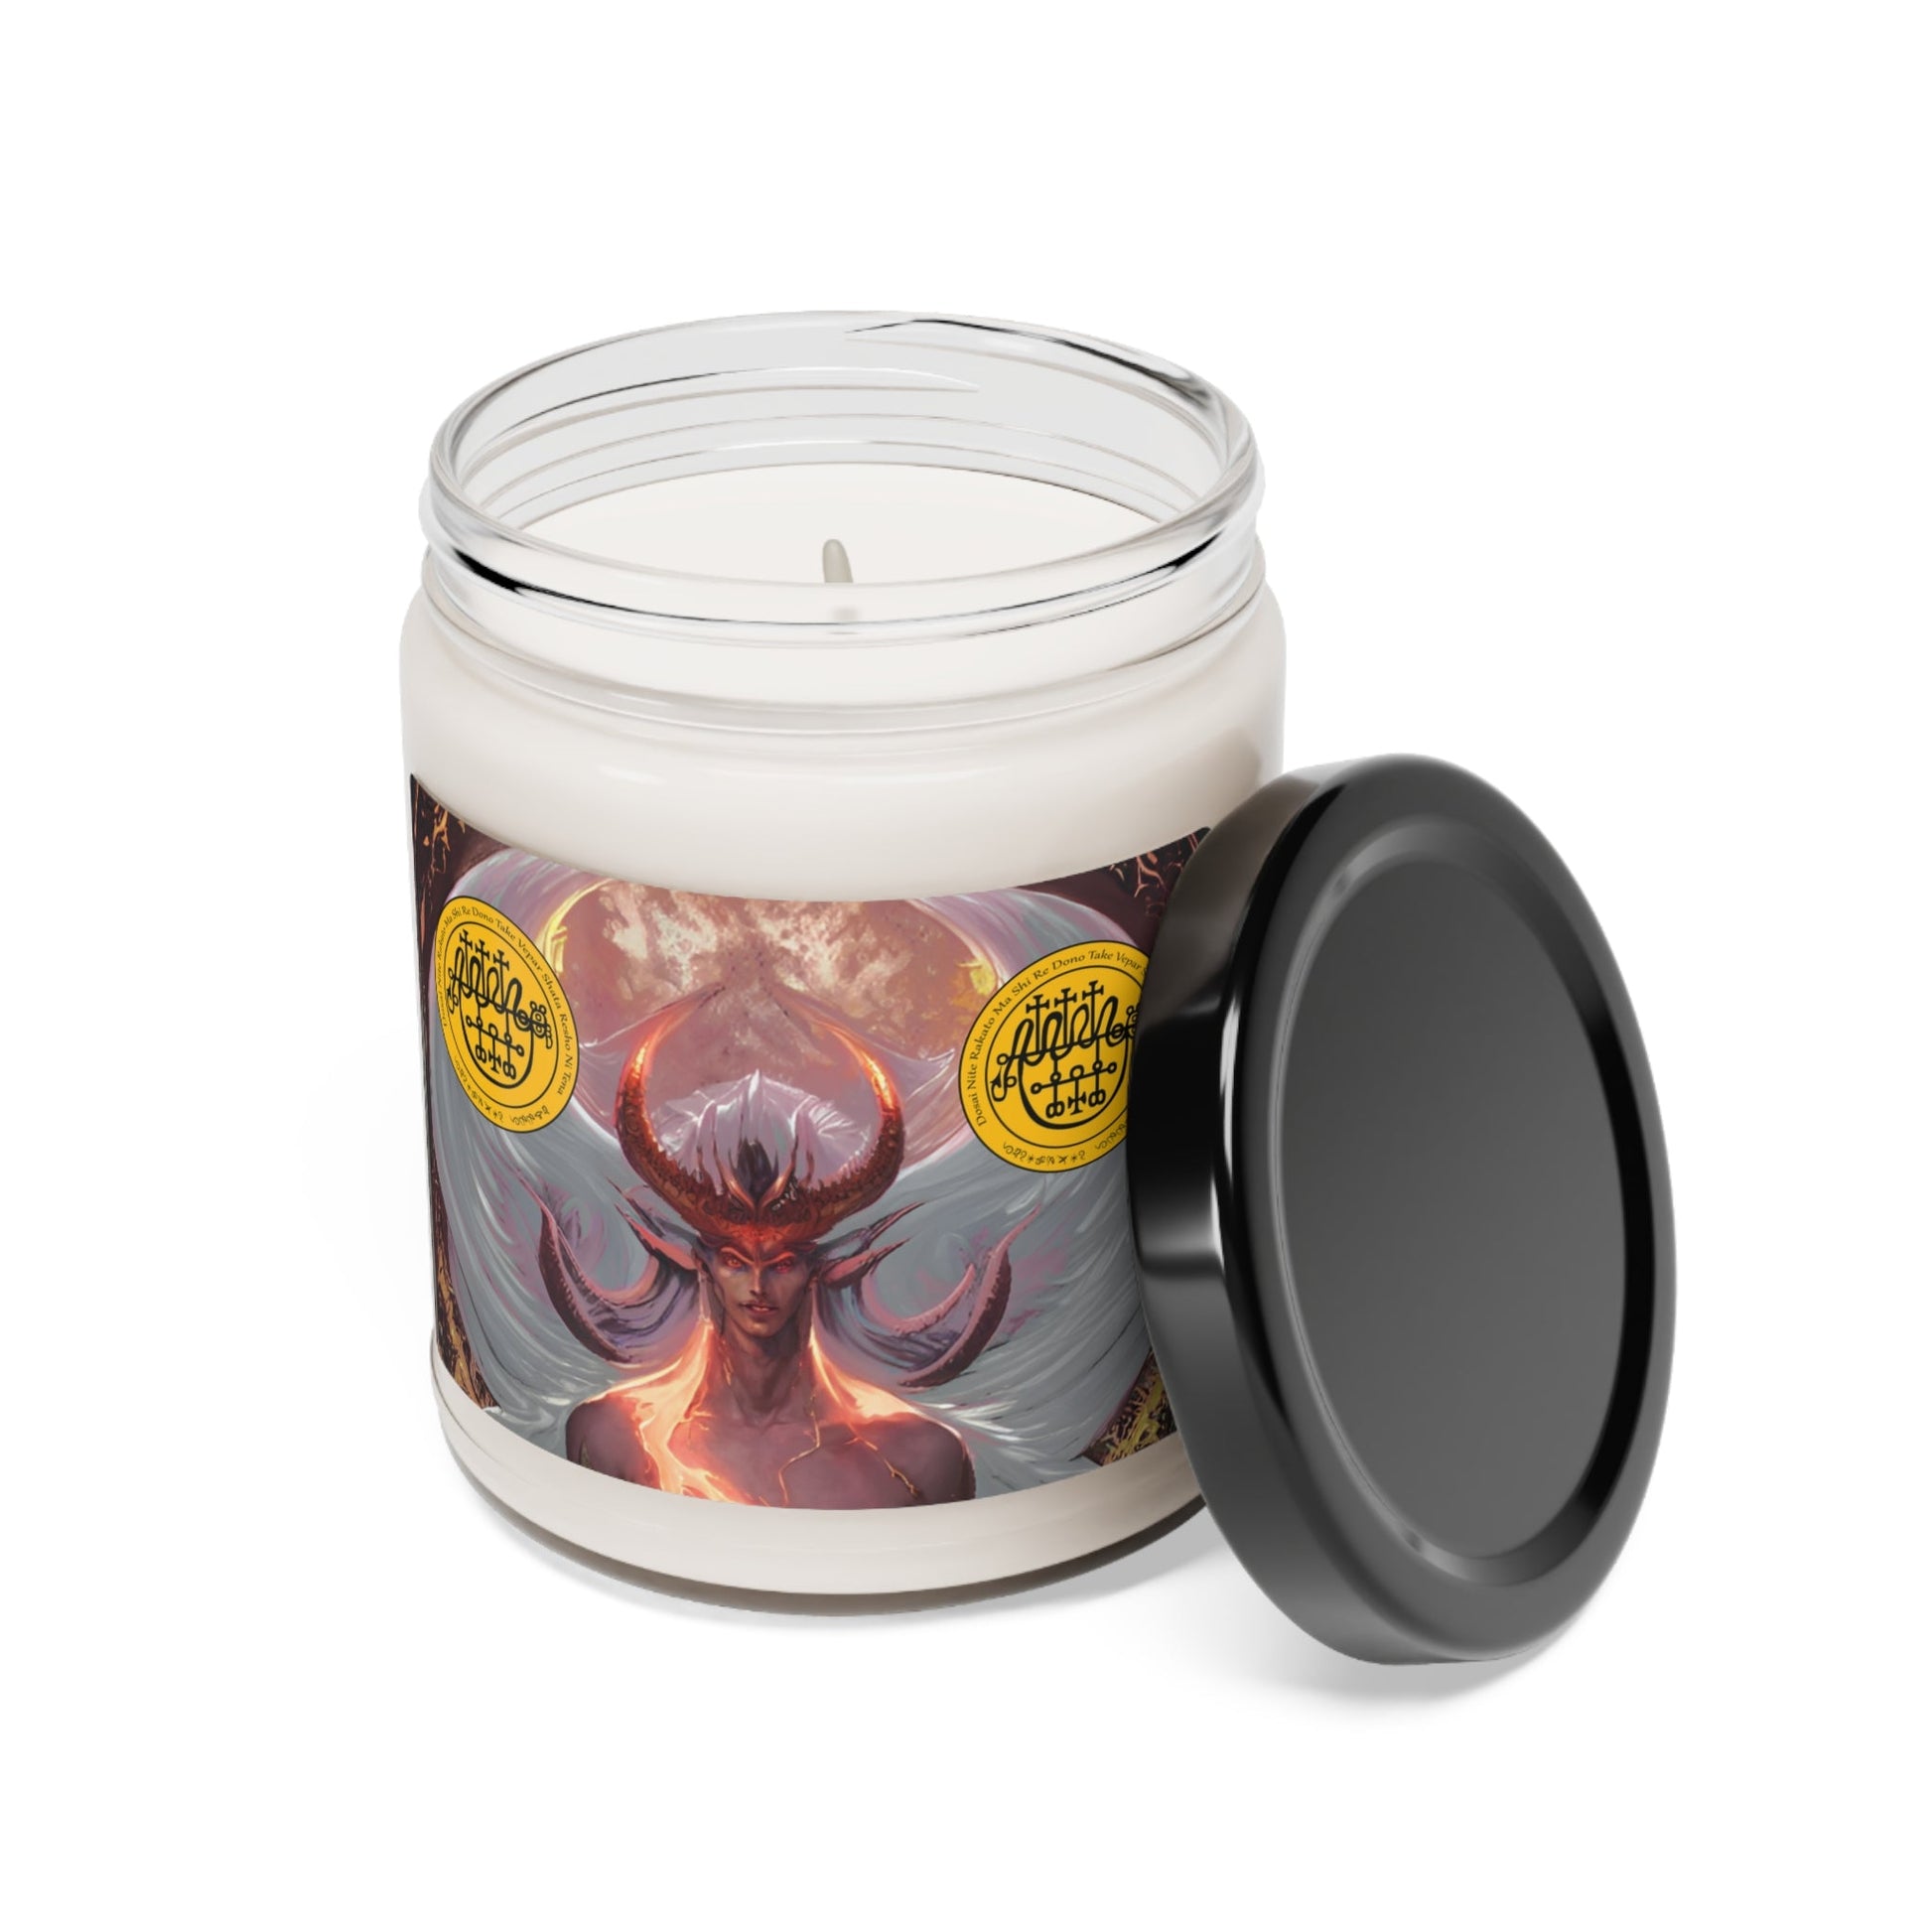 Demon-Vepar-Altar-Scented-Soy-Candle-for-offerings-rituals-initiations-o-praying-and-medtation-22